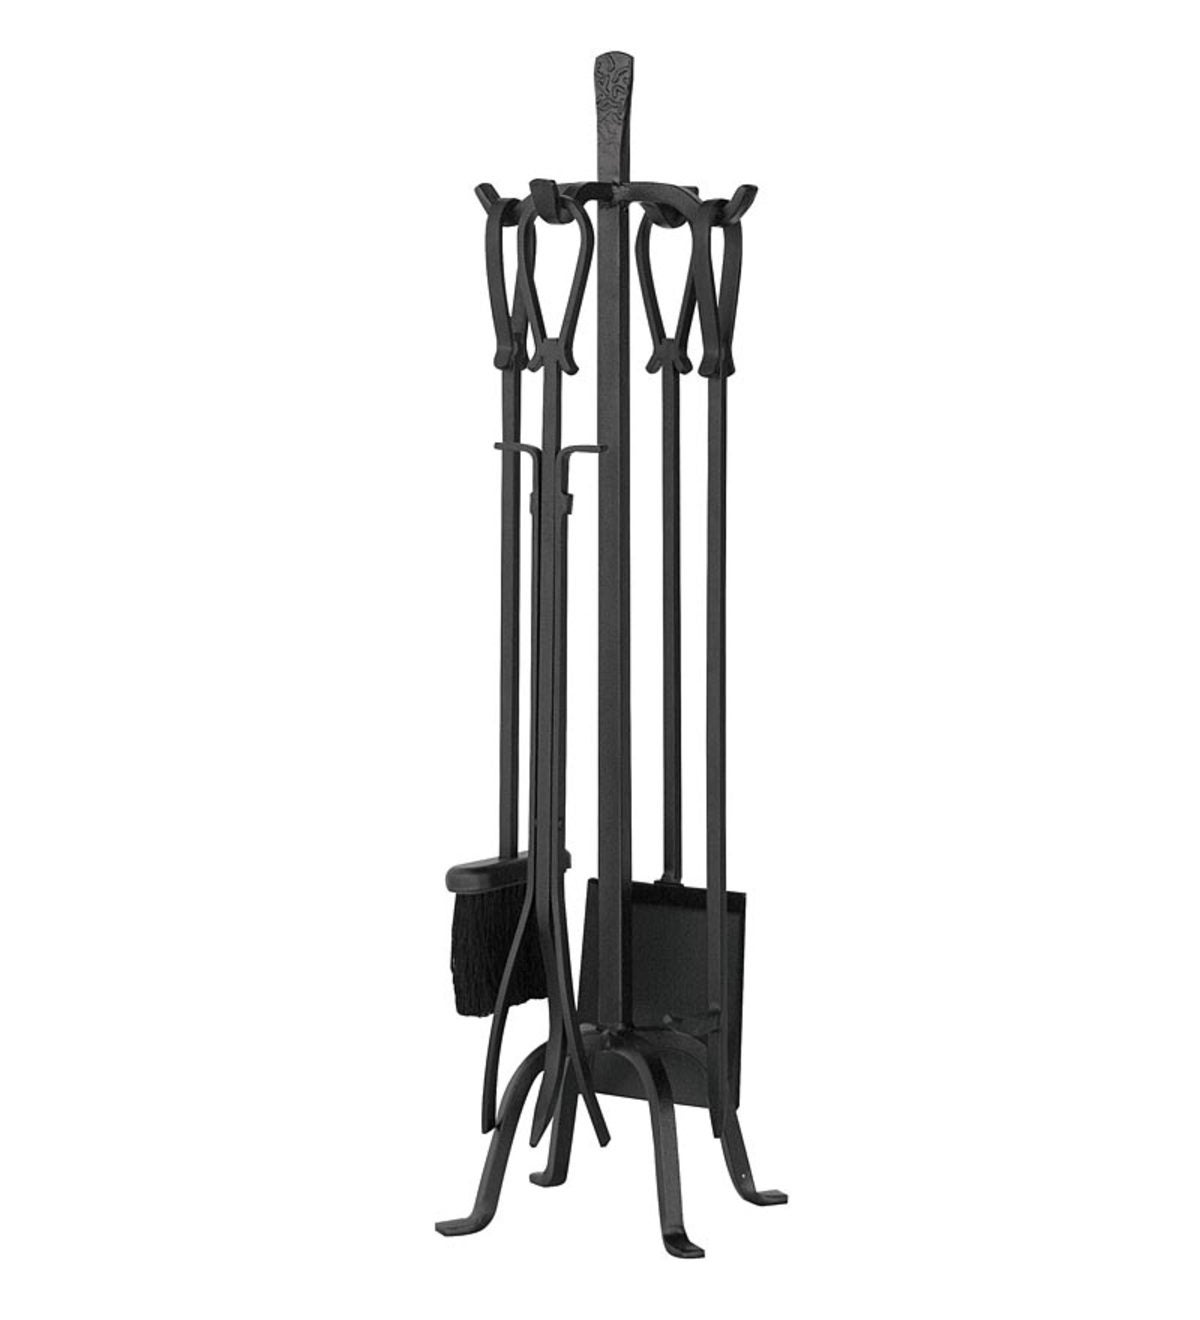 Olde World 5-Piece Fireplace Tool Set with Loop Handles